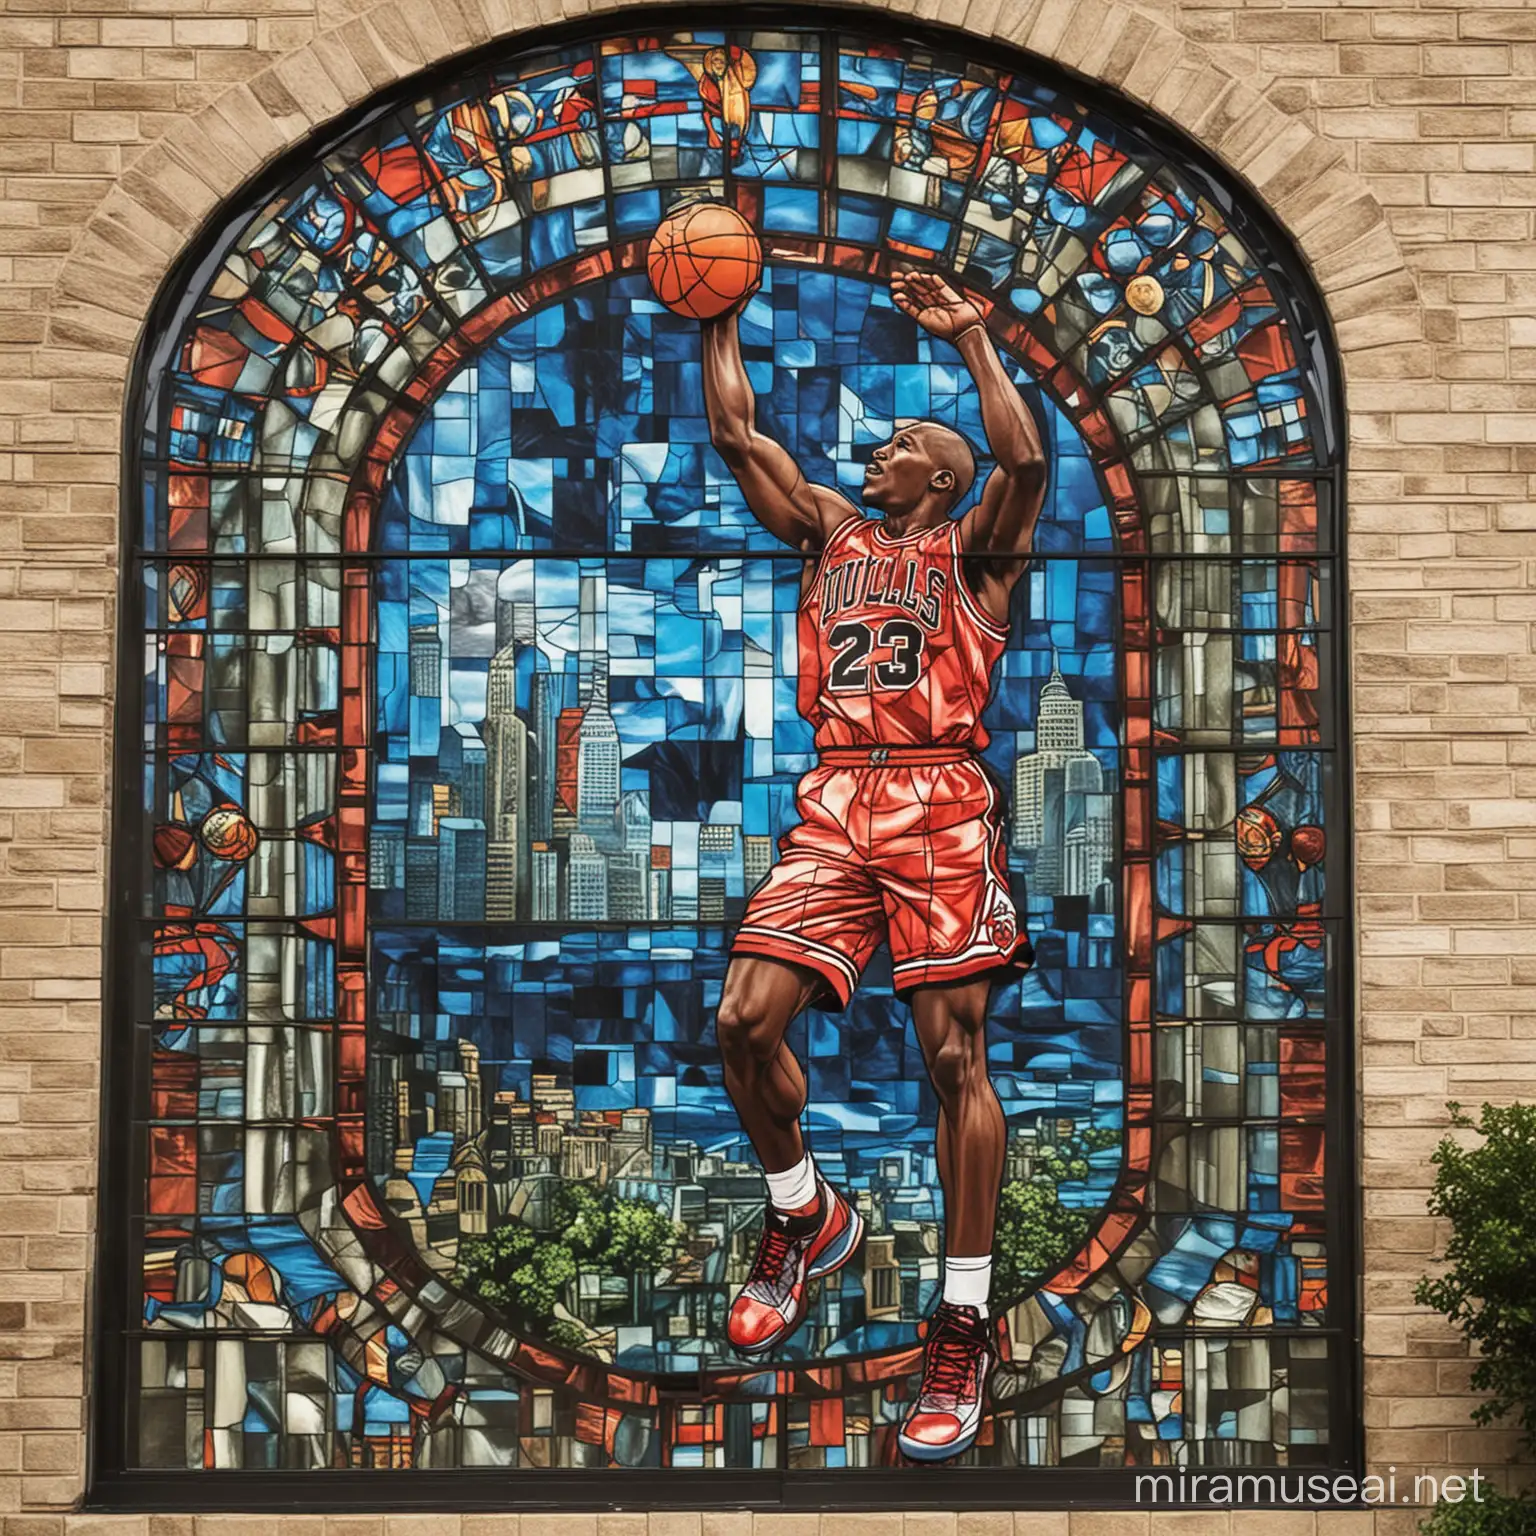 Michael Jordan dunk as a stained glass mural